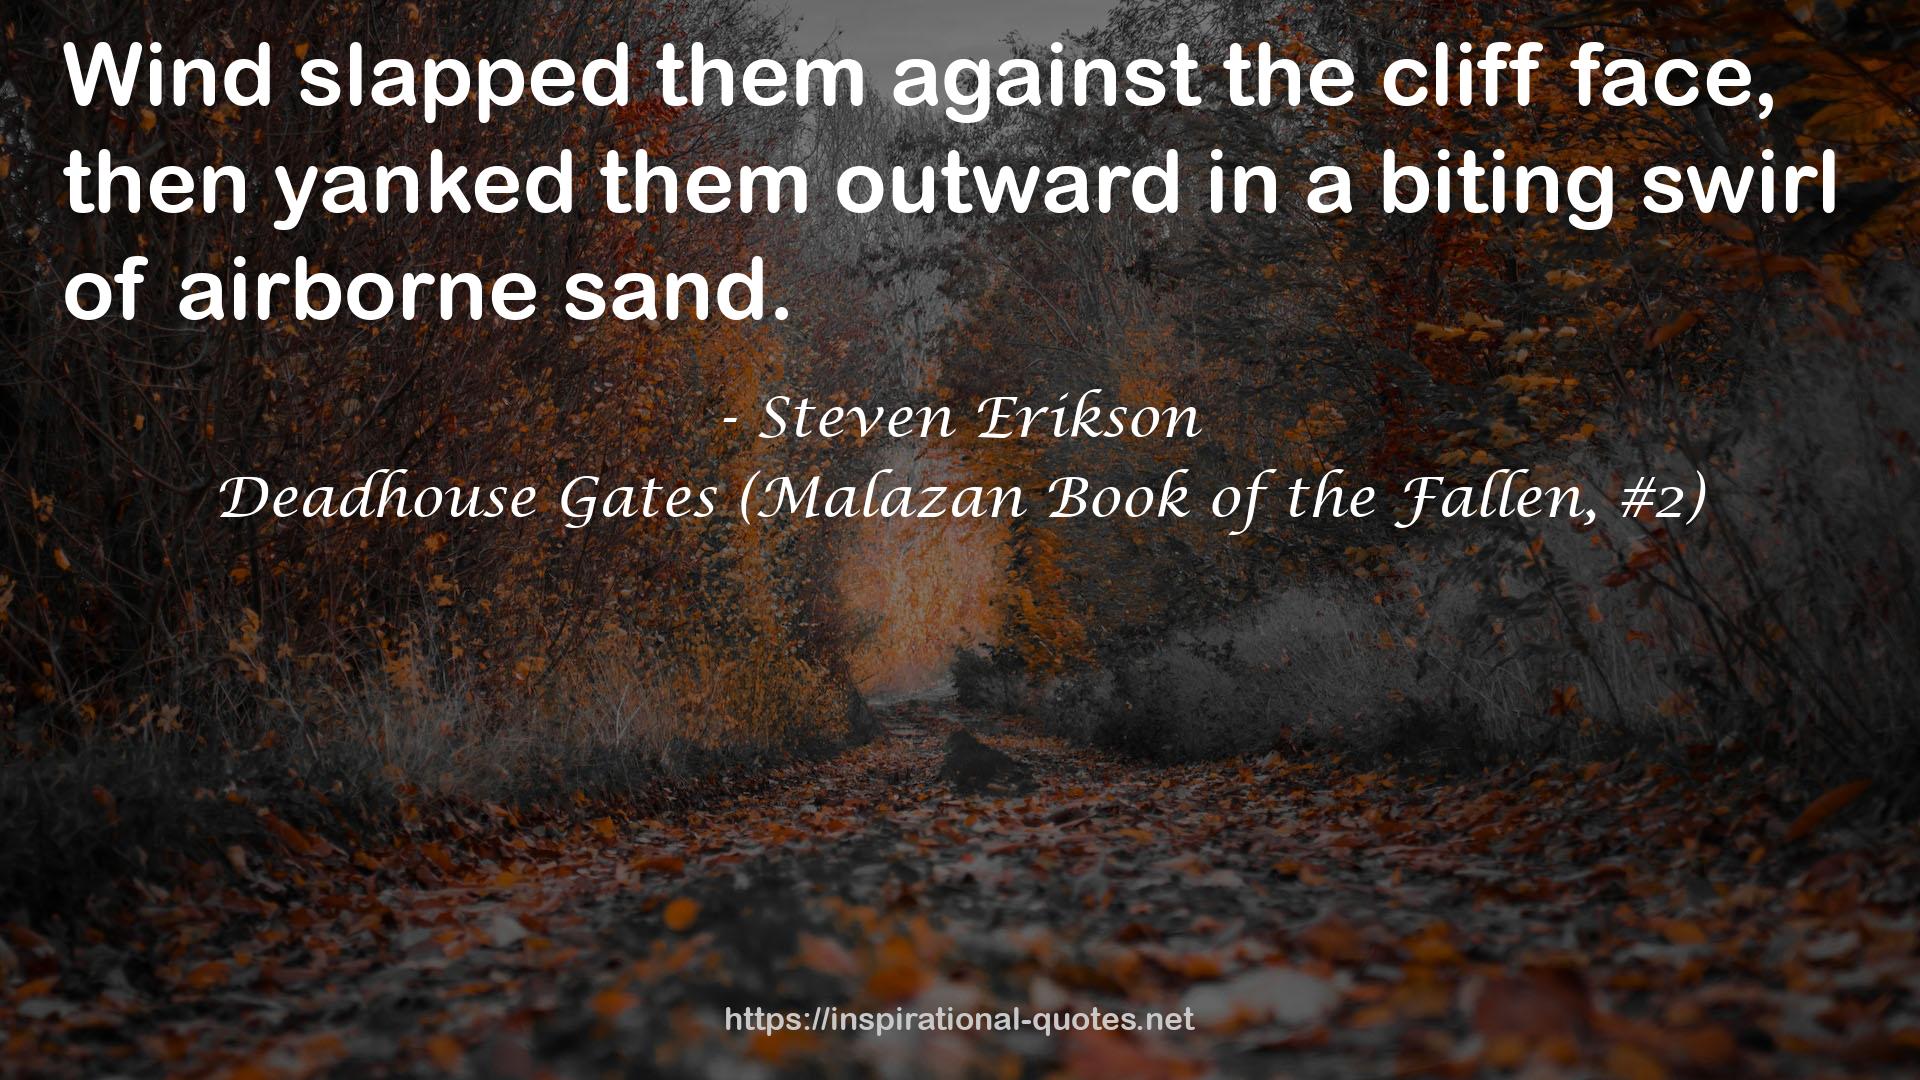 Deadhouse Gates (Malazan Book of the Fallen, #2) QUOTES